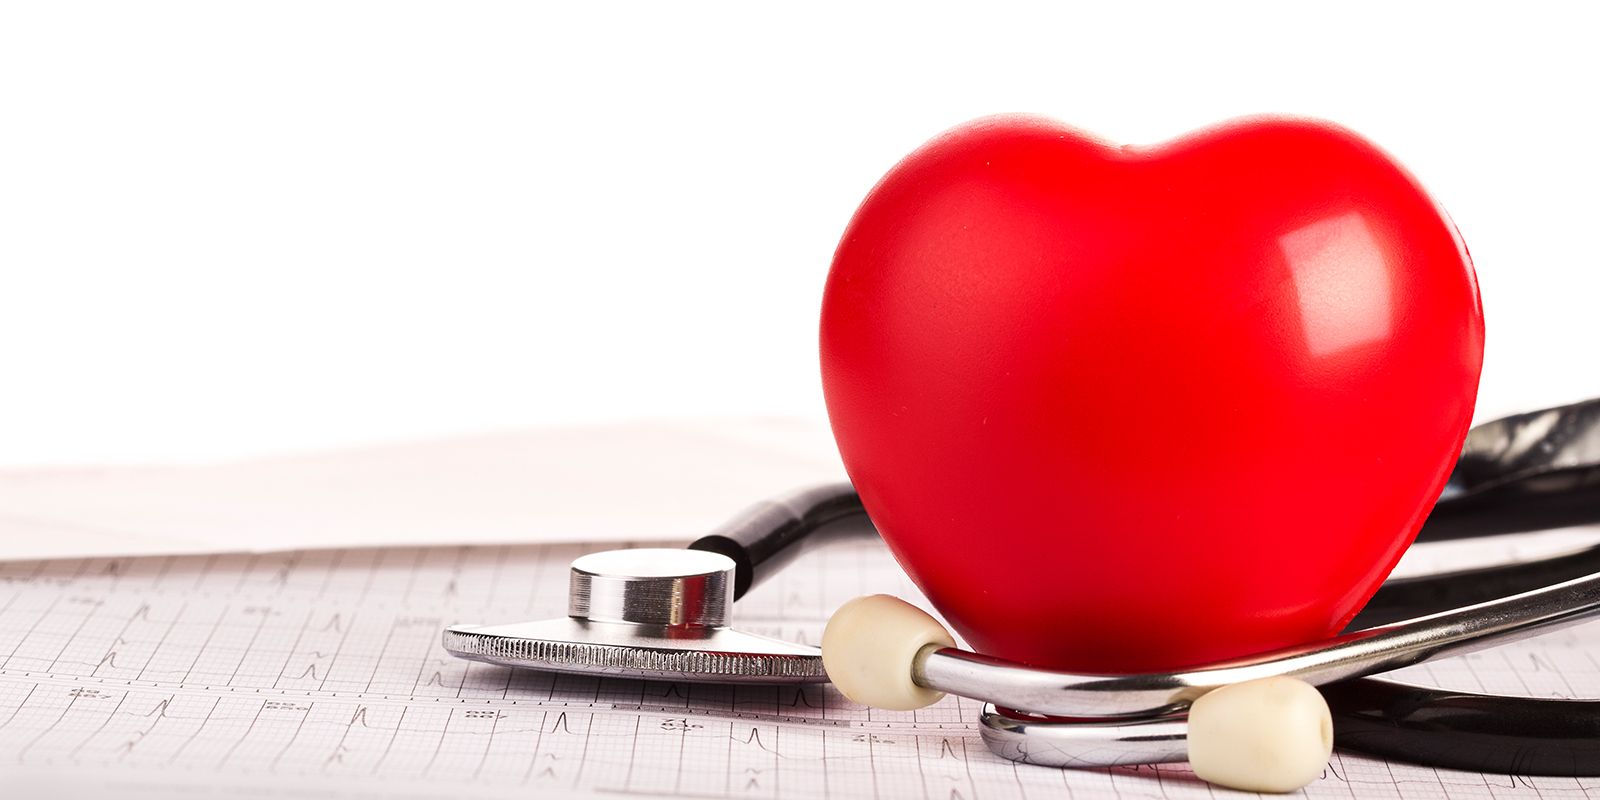 Stethoscope and Heart Shaped Stress Ball on Paper